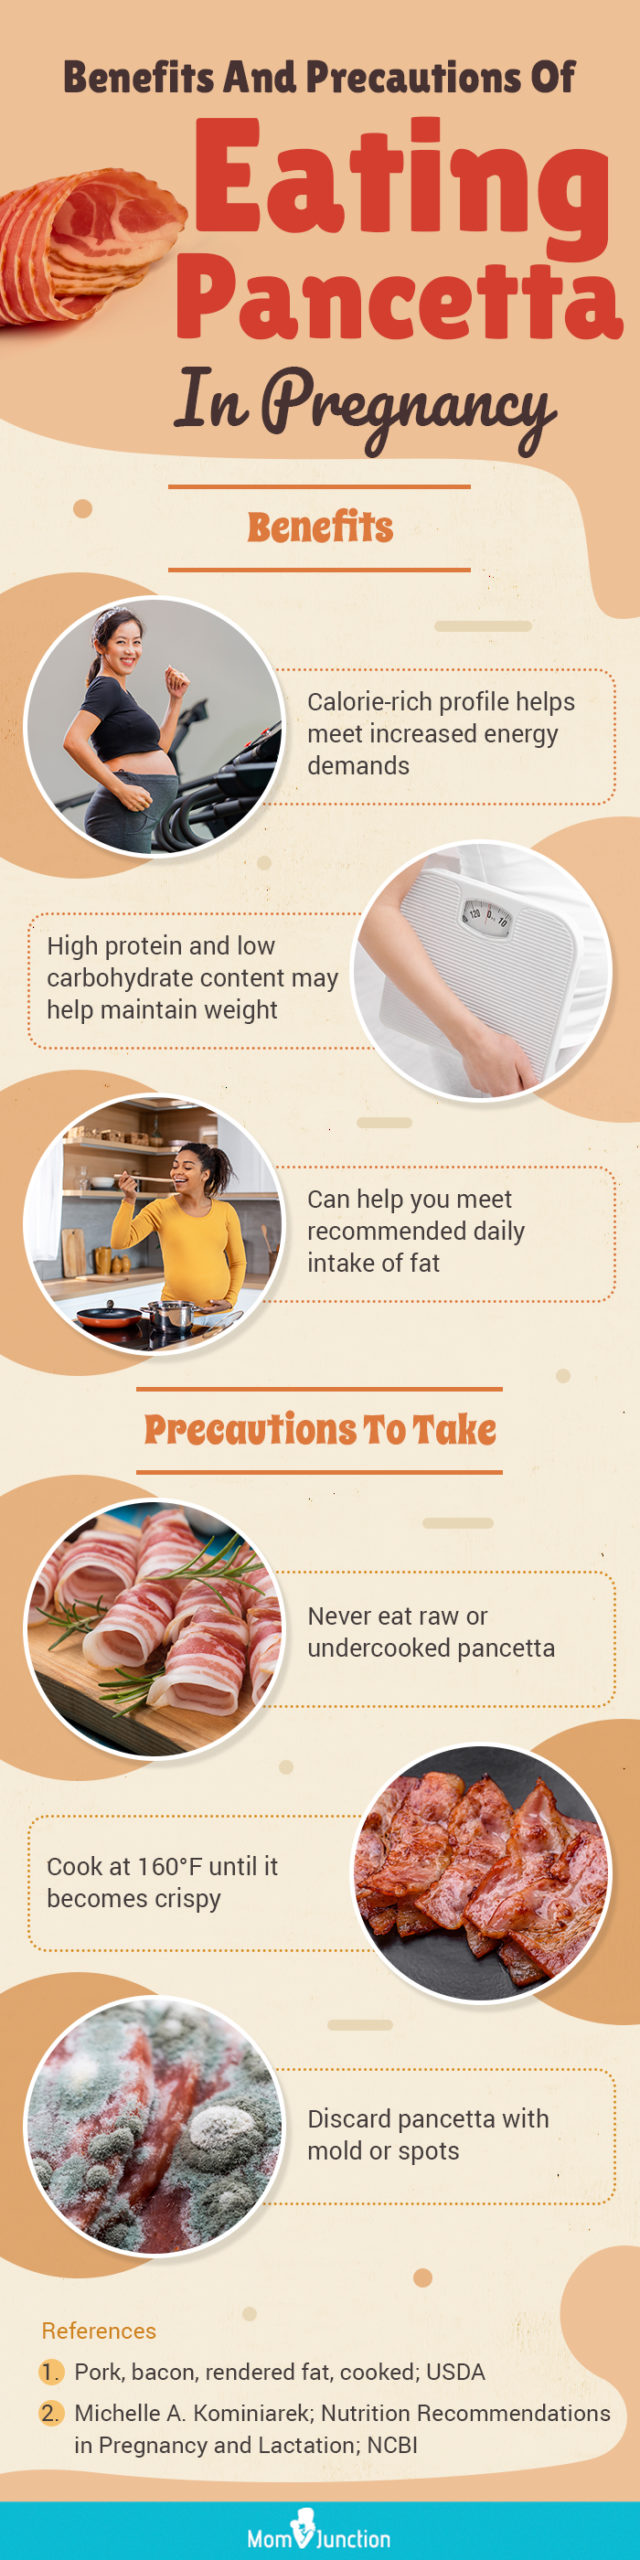 benefits and precautions of eating pancetta in pregnancy (infographic)